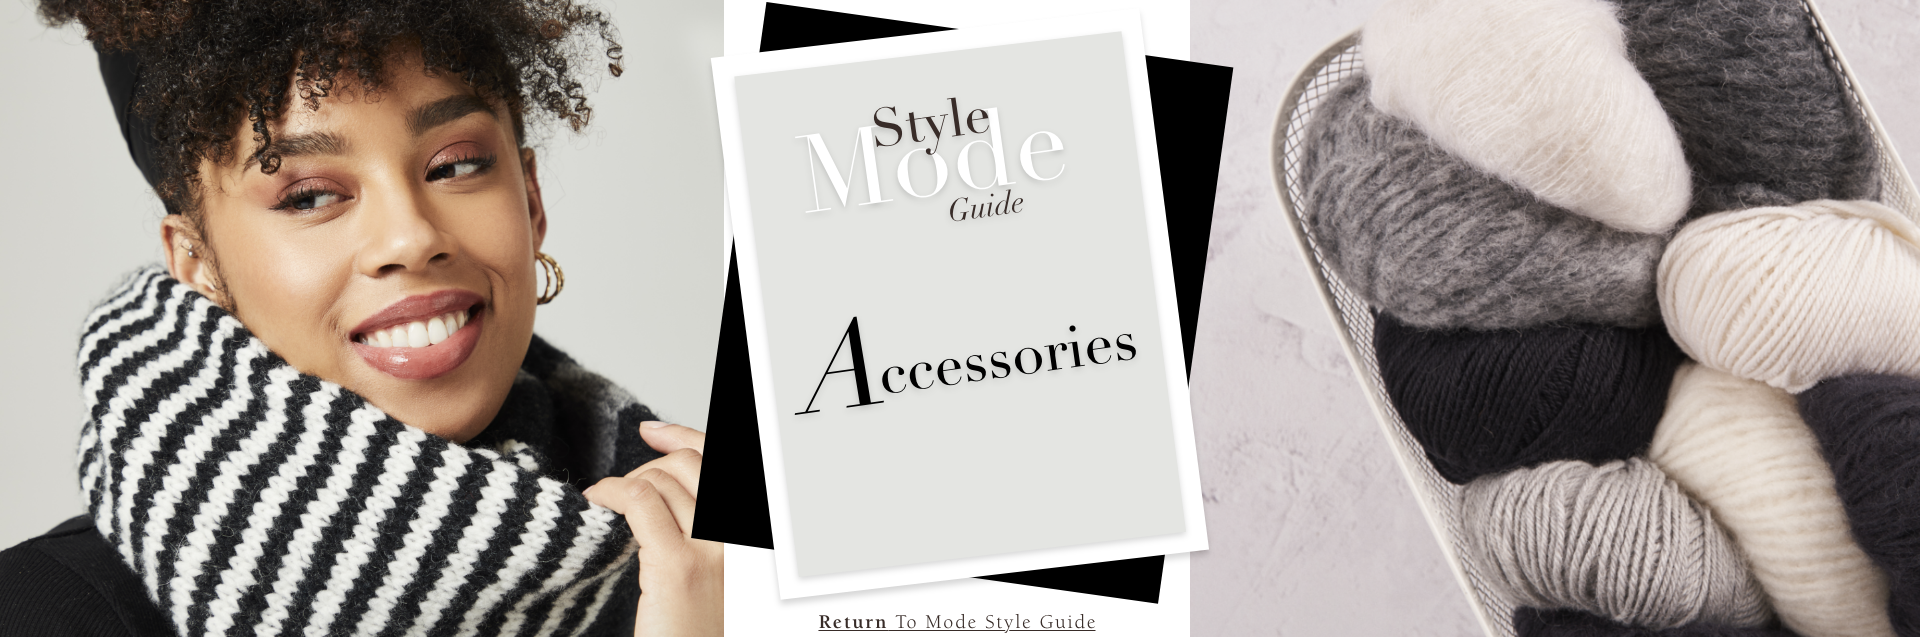 MODE Style Guide Accessories